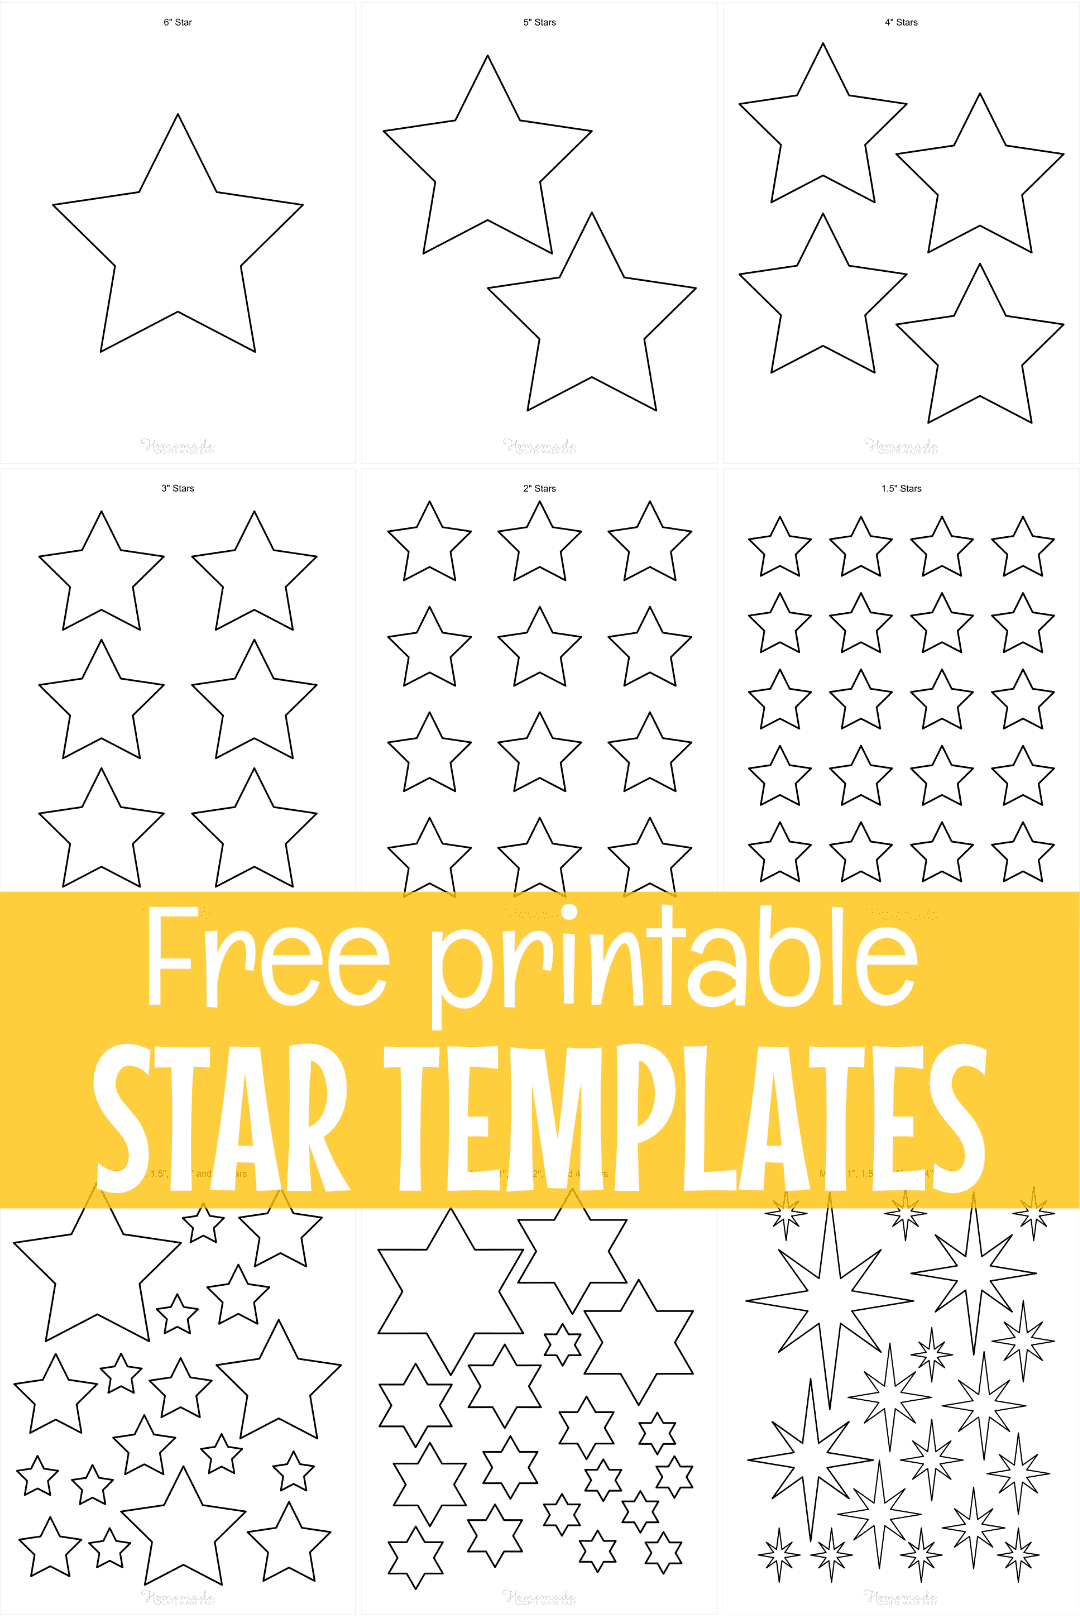 Free Printable Star Templates & Outlines - All Sizes Large & Small In Place Card Template Free 6 Per Page